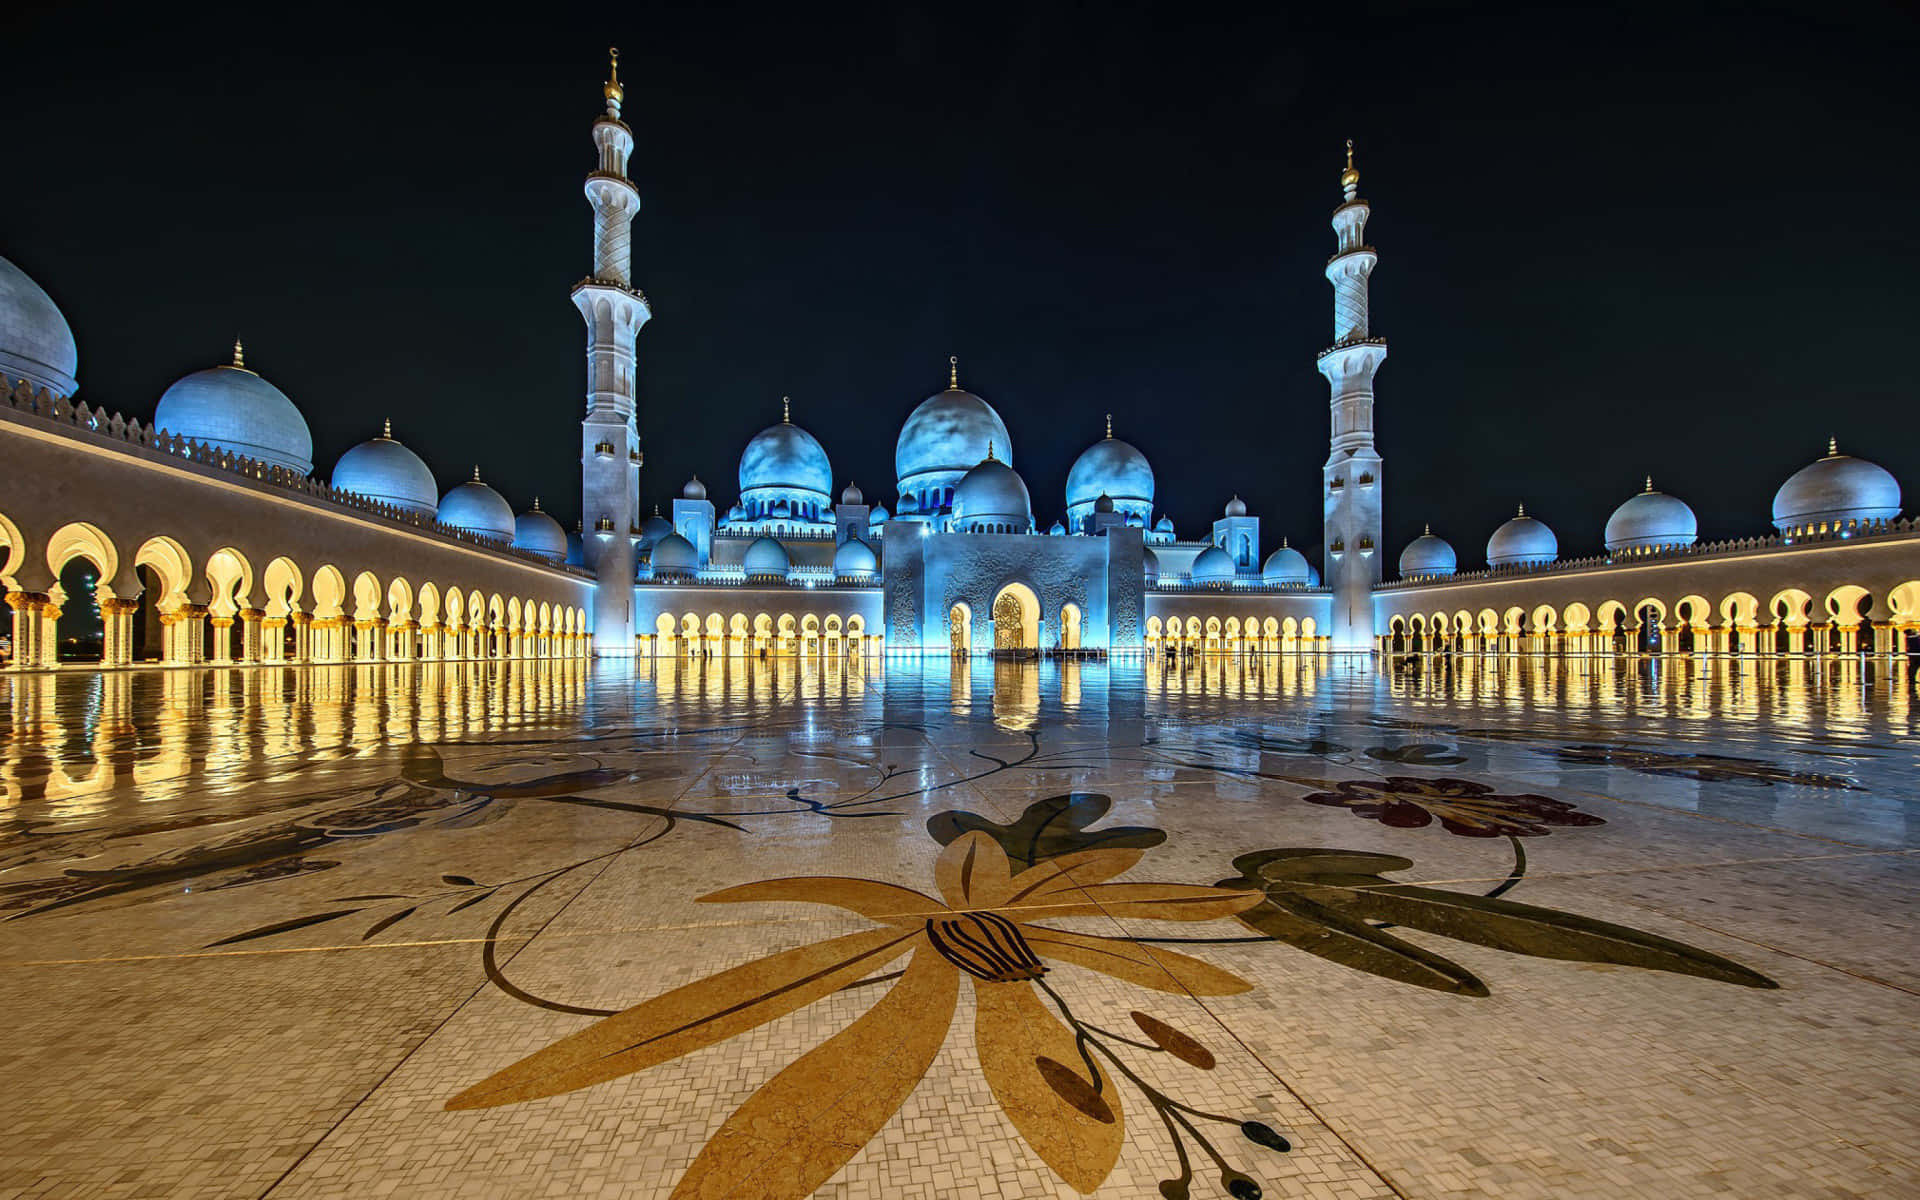 “Peaceful and tranquil mosque around sunset”